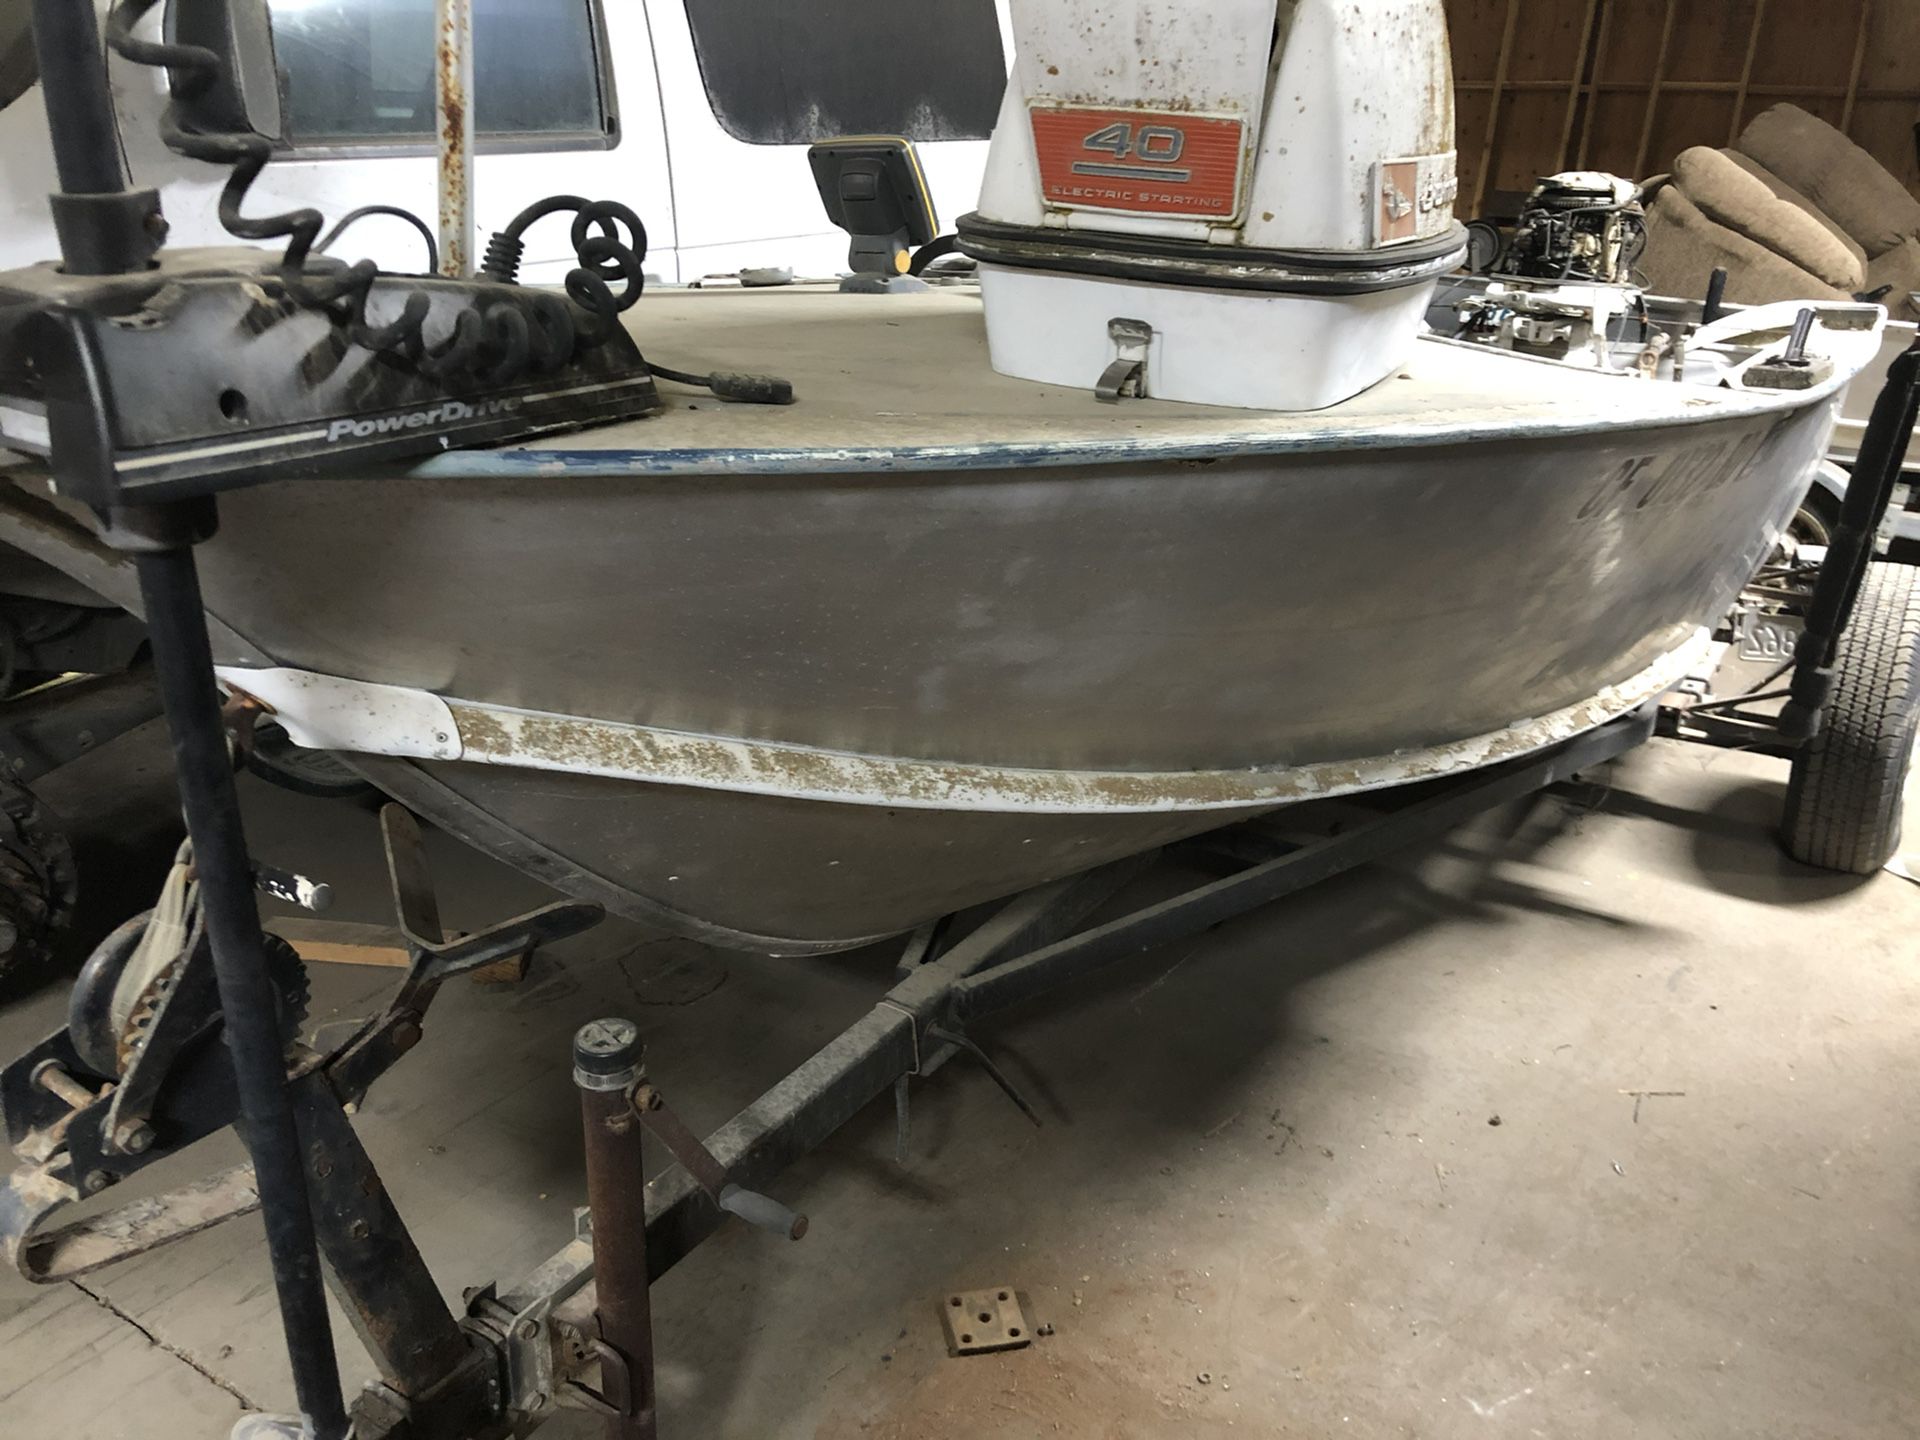 Crestliner 14 Foot Aluminum Boat With Johnson Outboard And Home Made Trailer